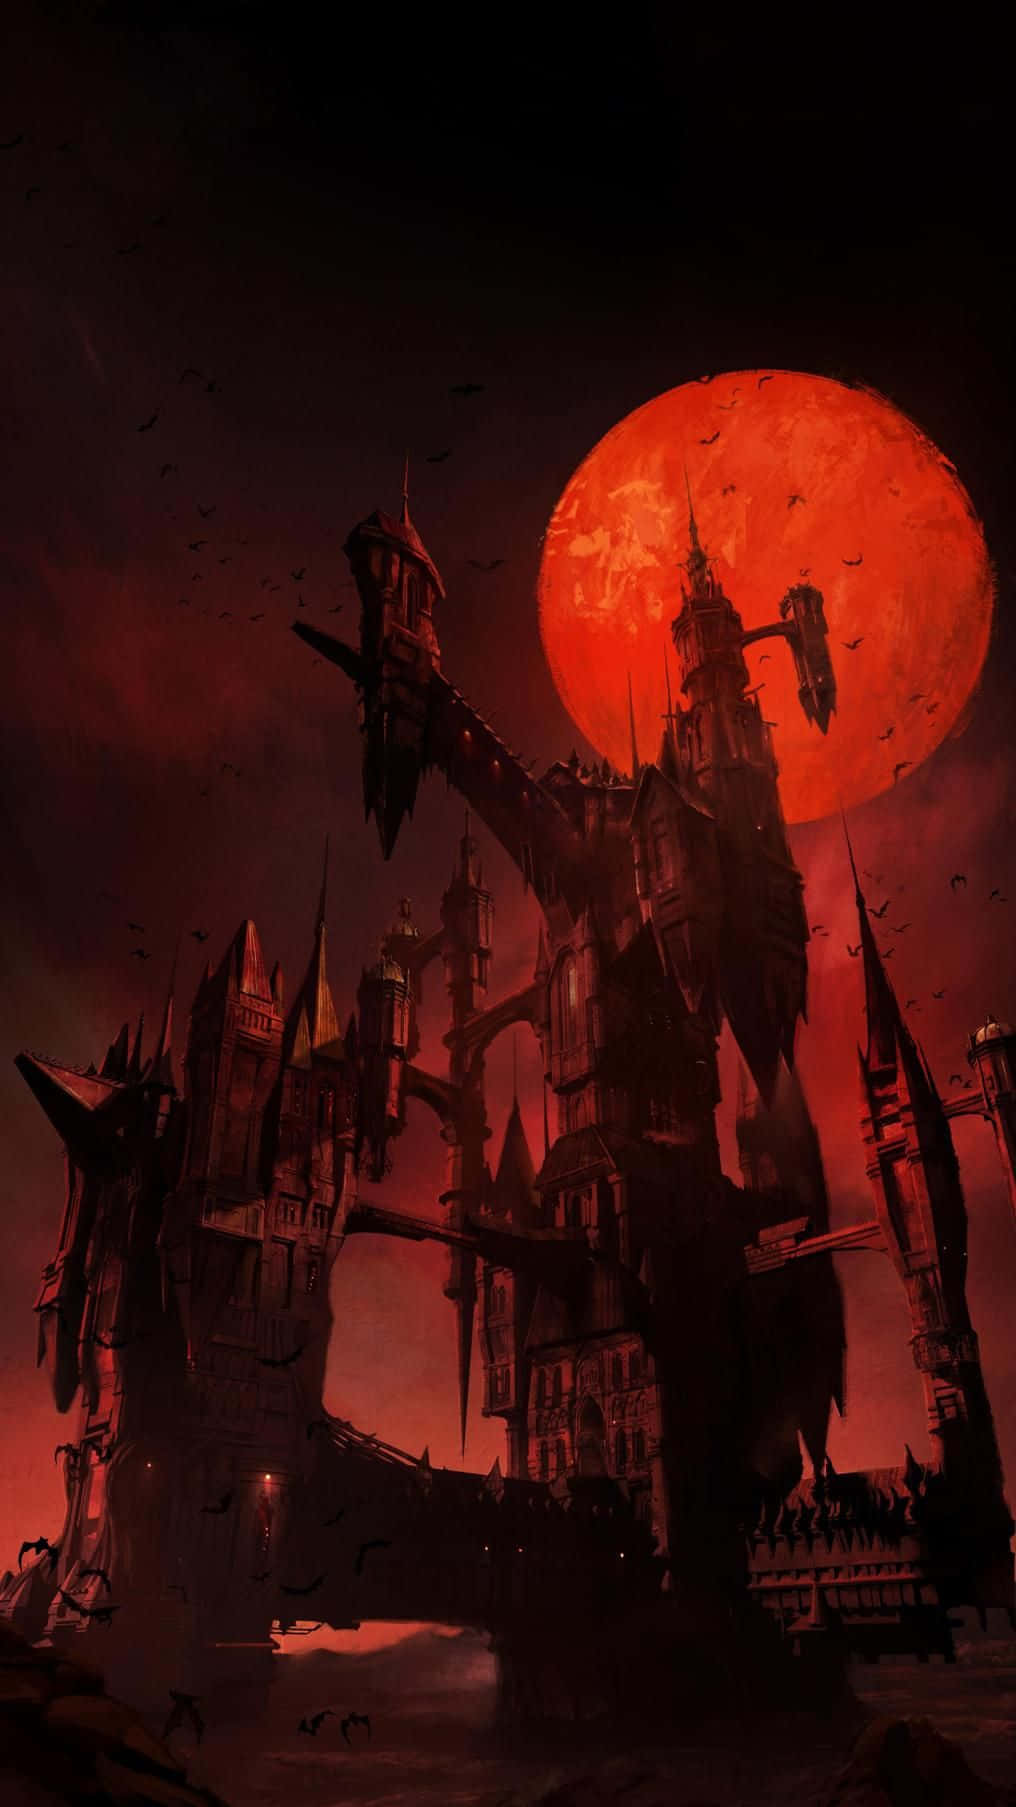 The Dark Prince, Dracula Ruling Over His Gothic Castle In The Game Castlevania. Wallpaper